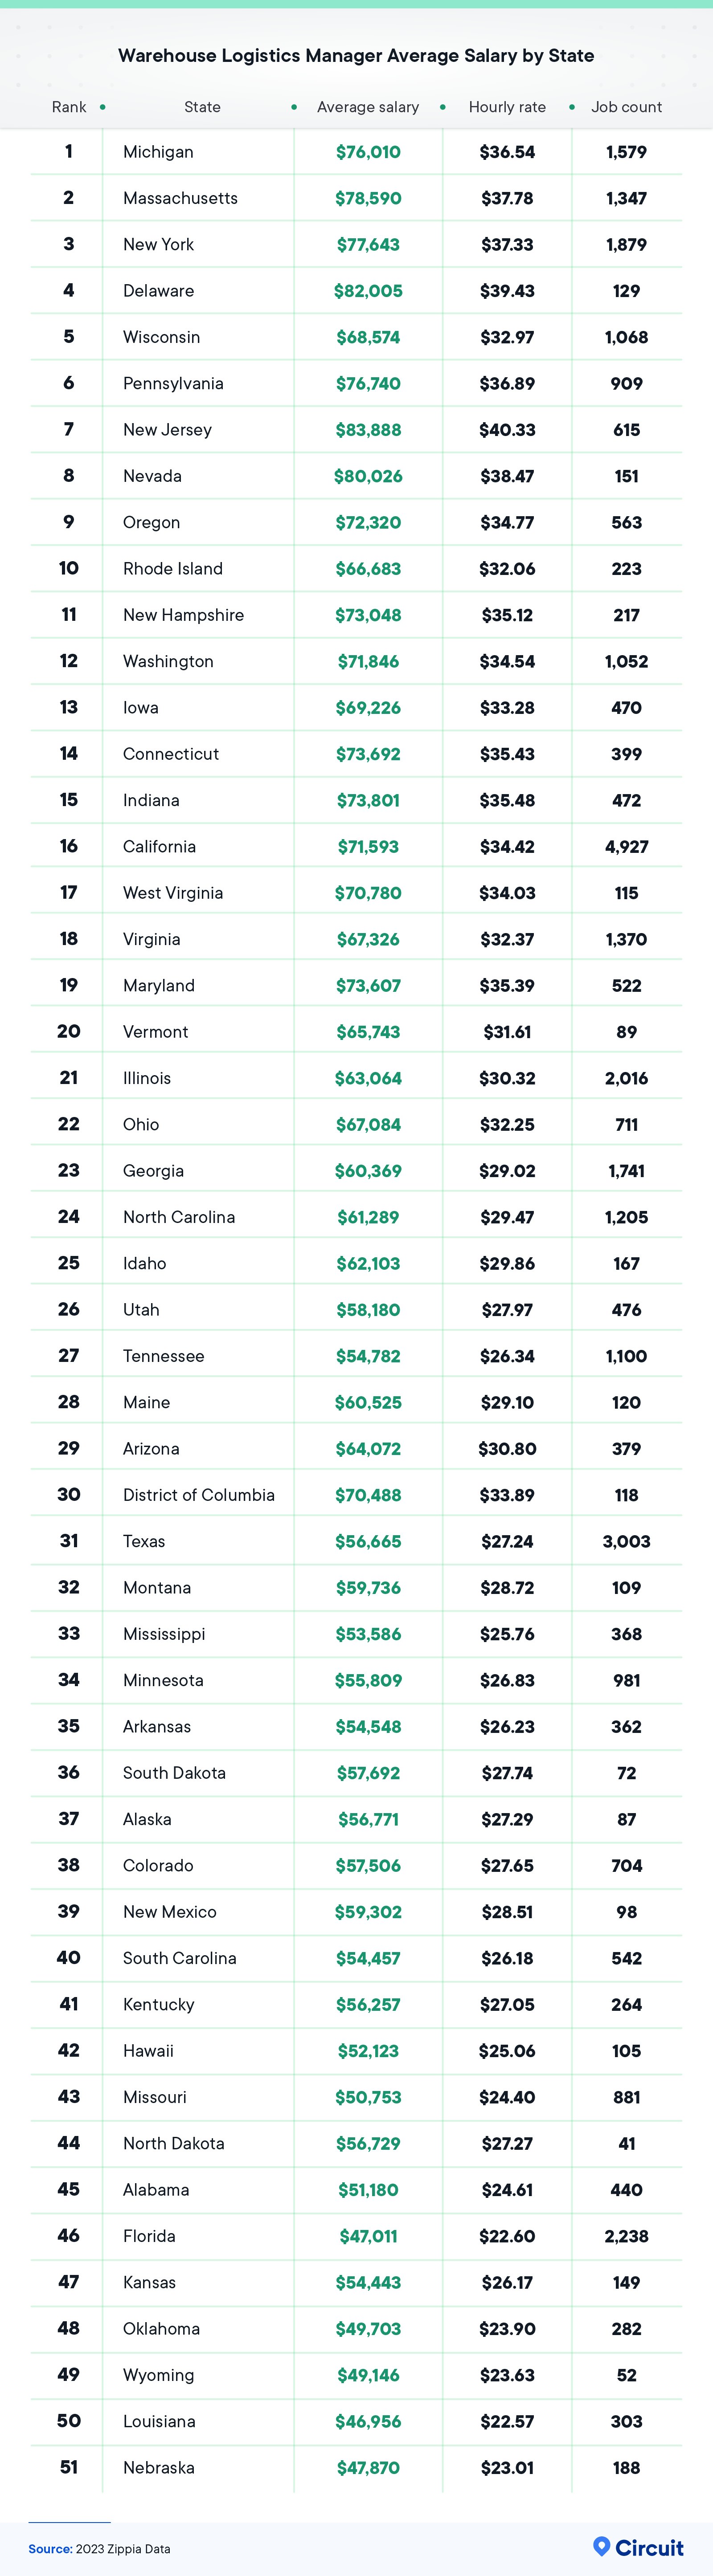 Warehouse logistics manager average salary by state